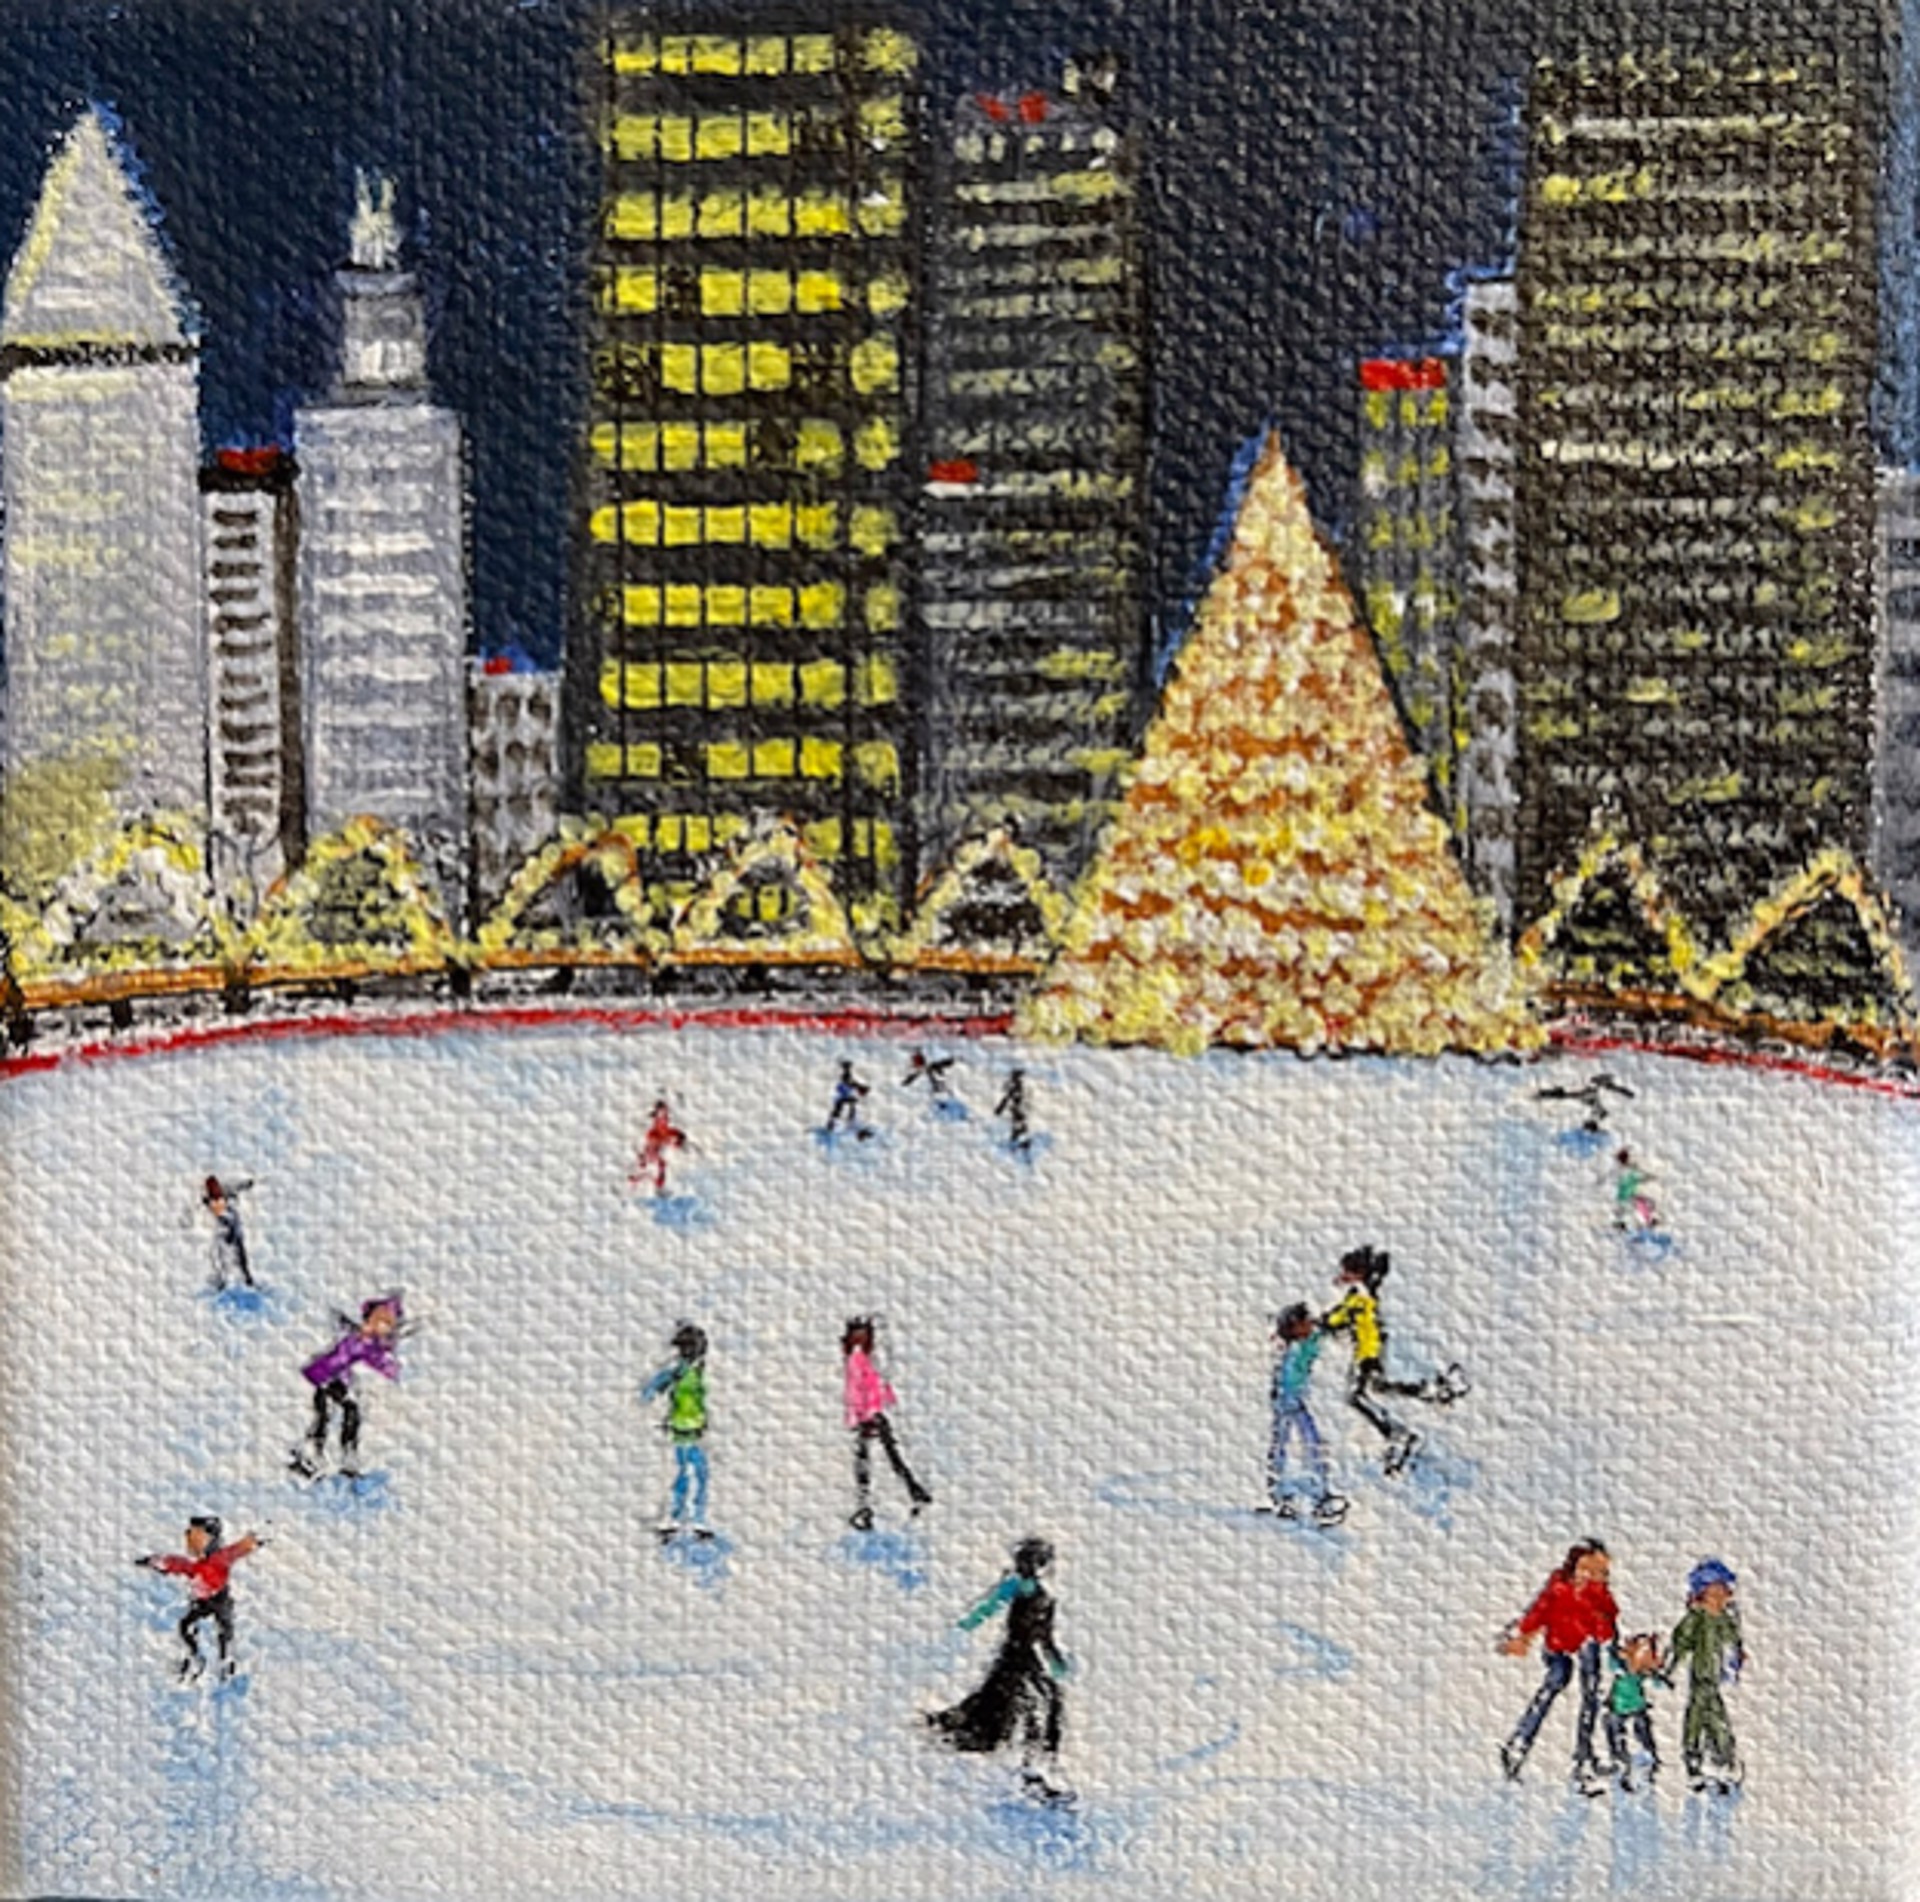 Christmas in New York by Melody Lafferty